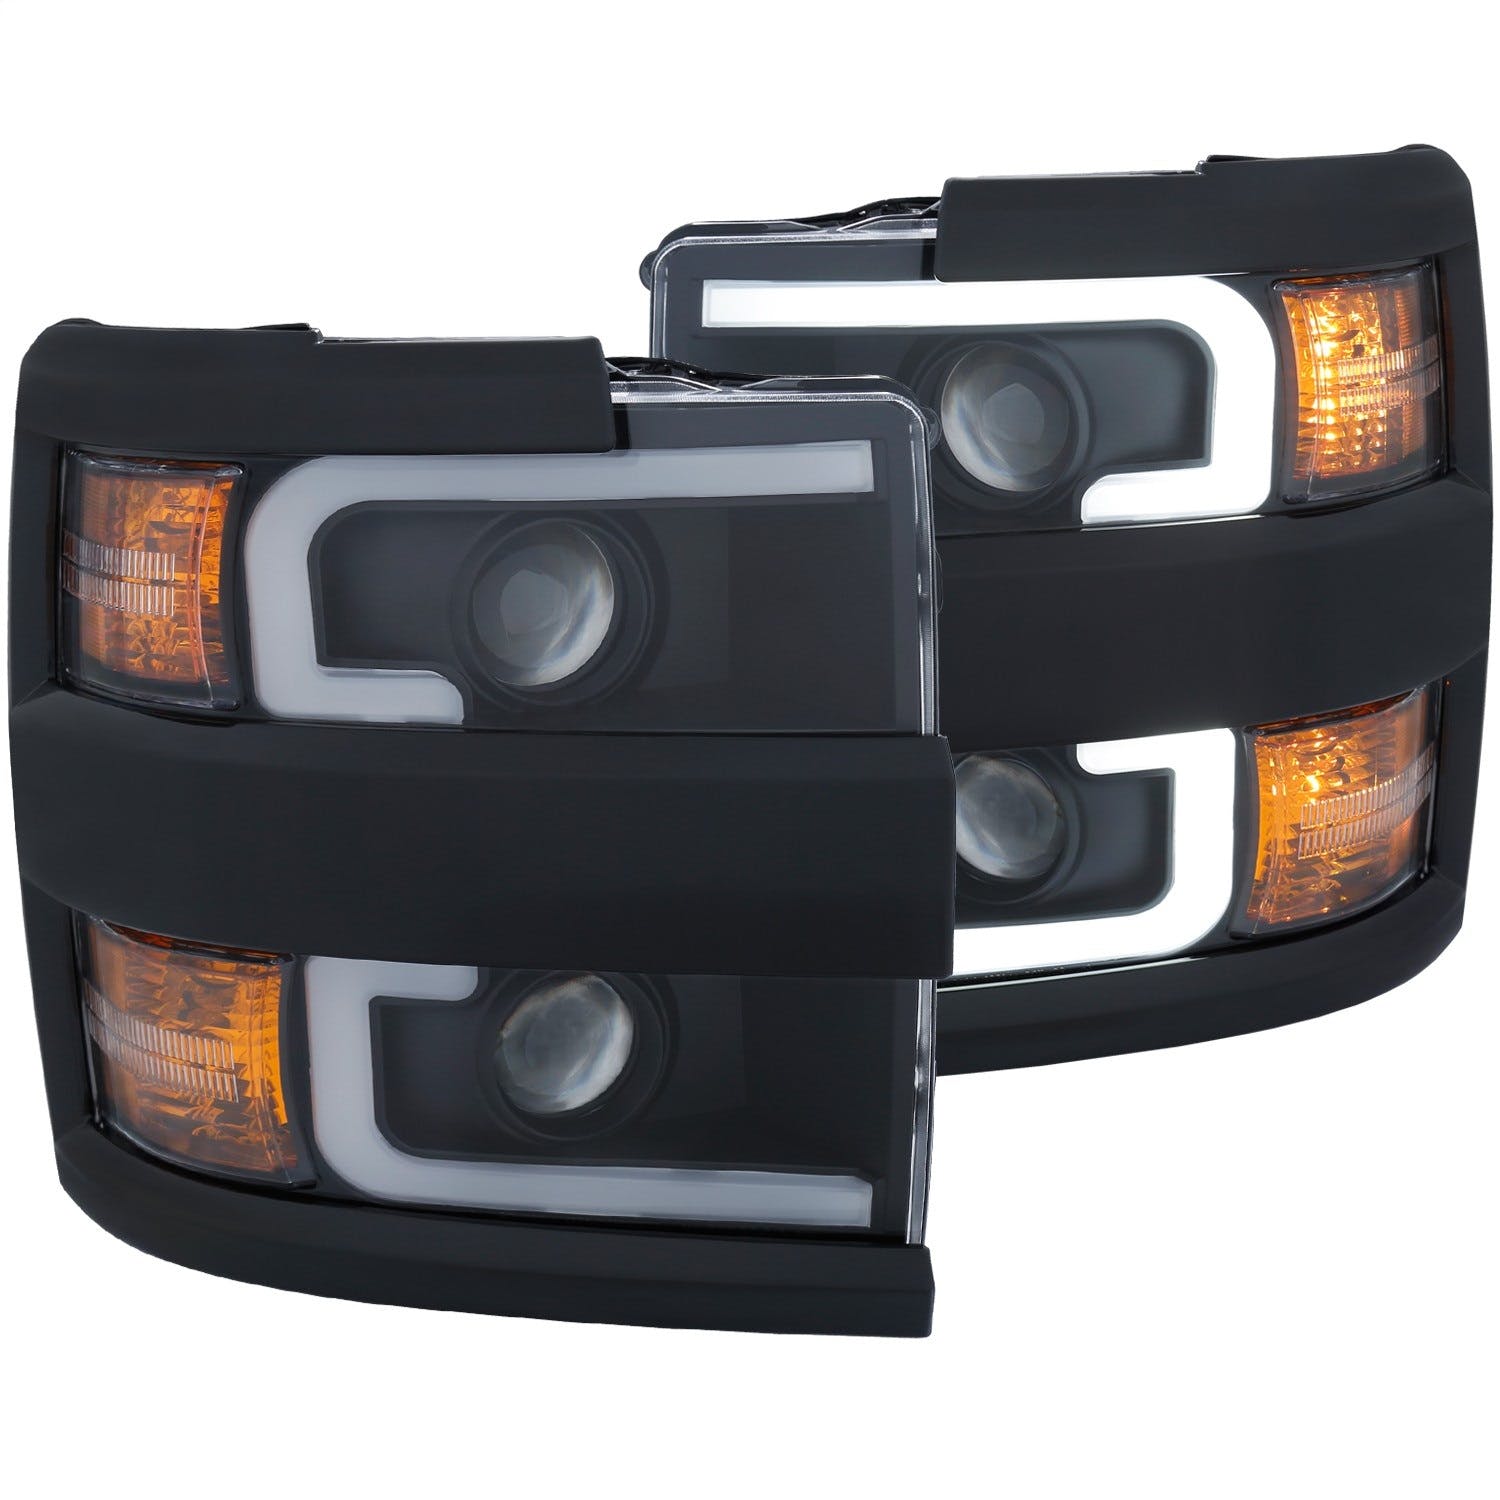 AnzoUSA 111363 Projector Headlights with Plank Style Design Black with Amber